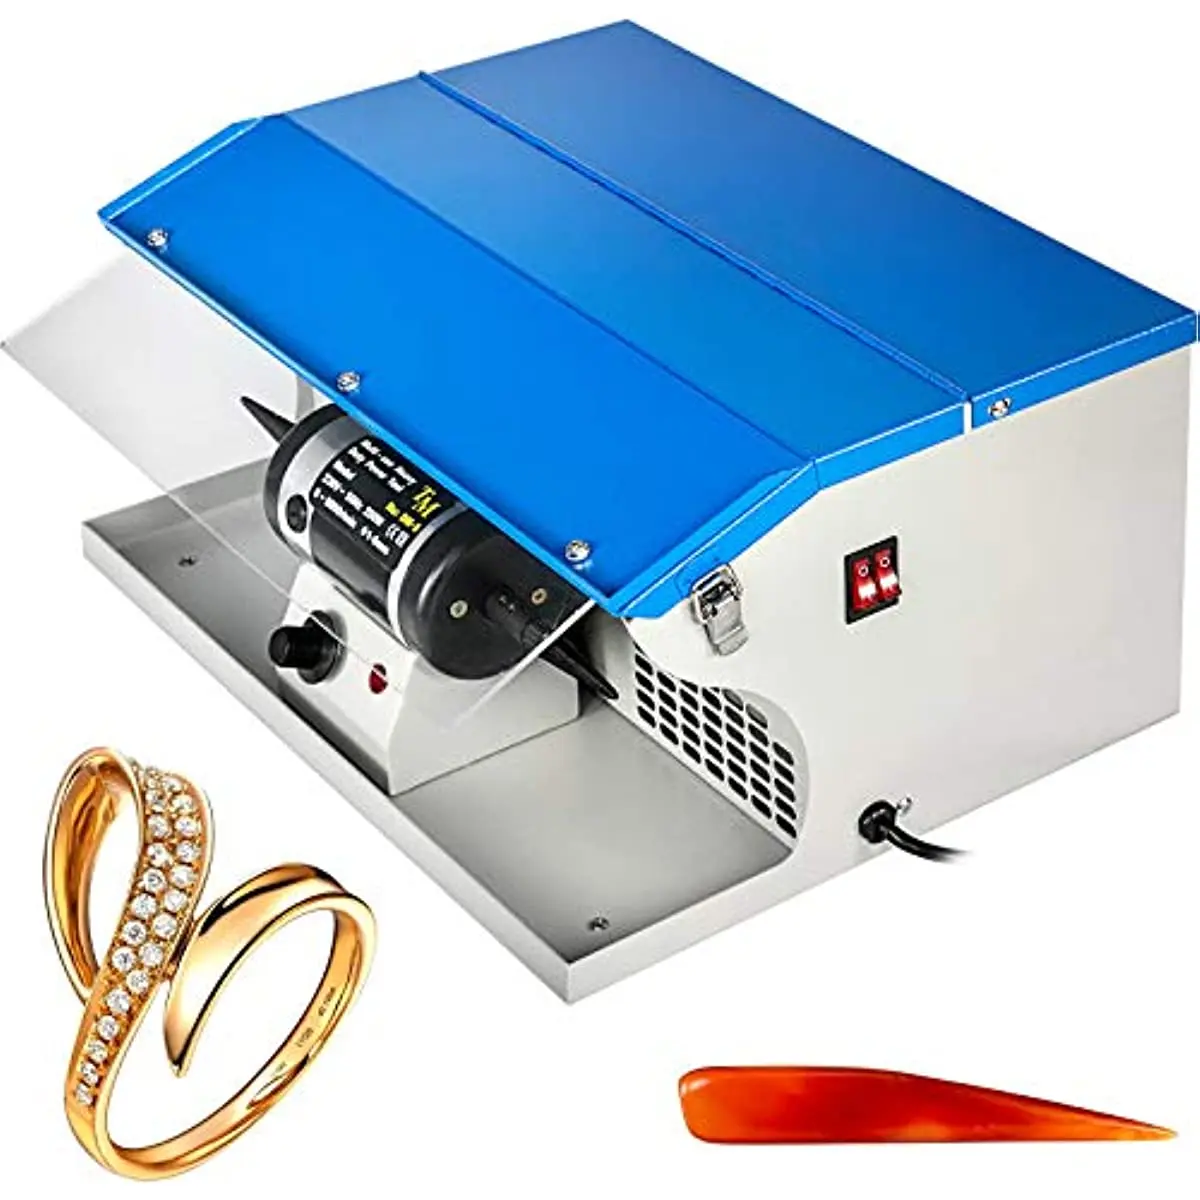 Polishing Buffing Machine 200W Jewelry Buffing Machine 220V Jewelry Polishing Tool Dust Collector with Light Table Top